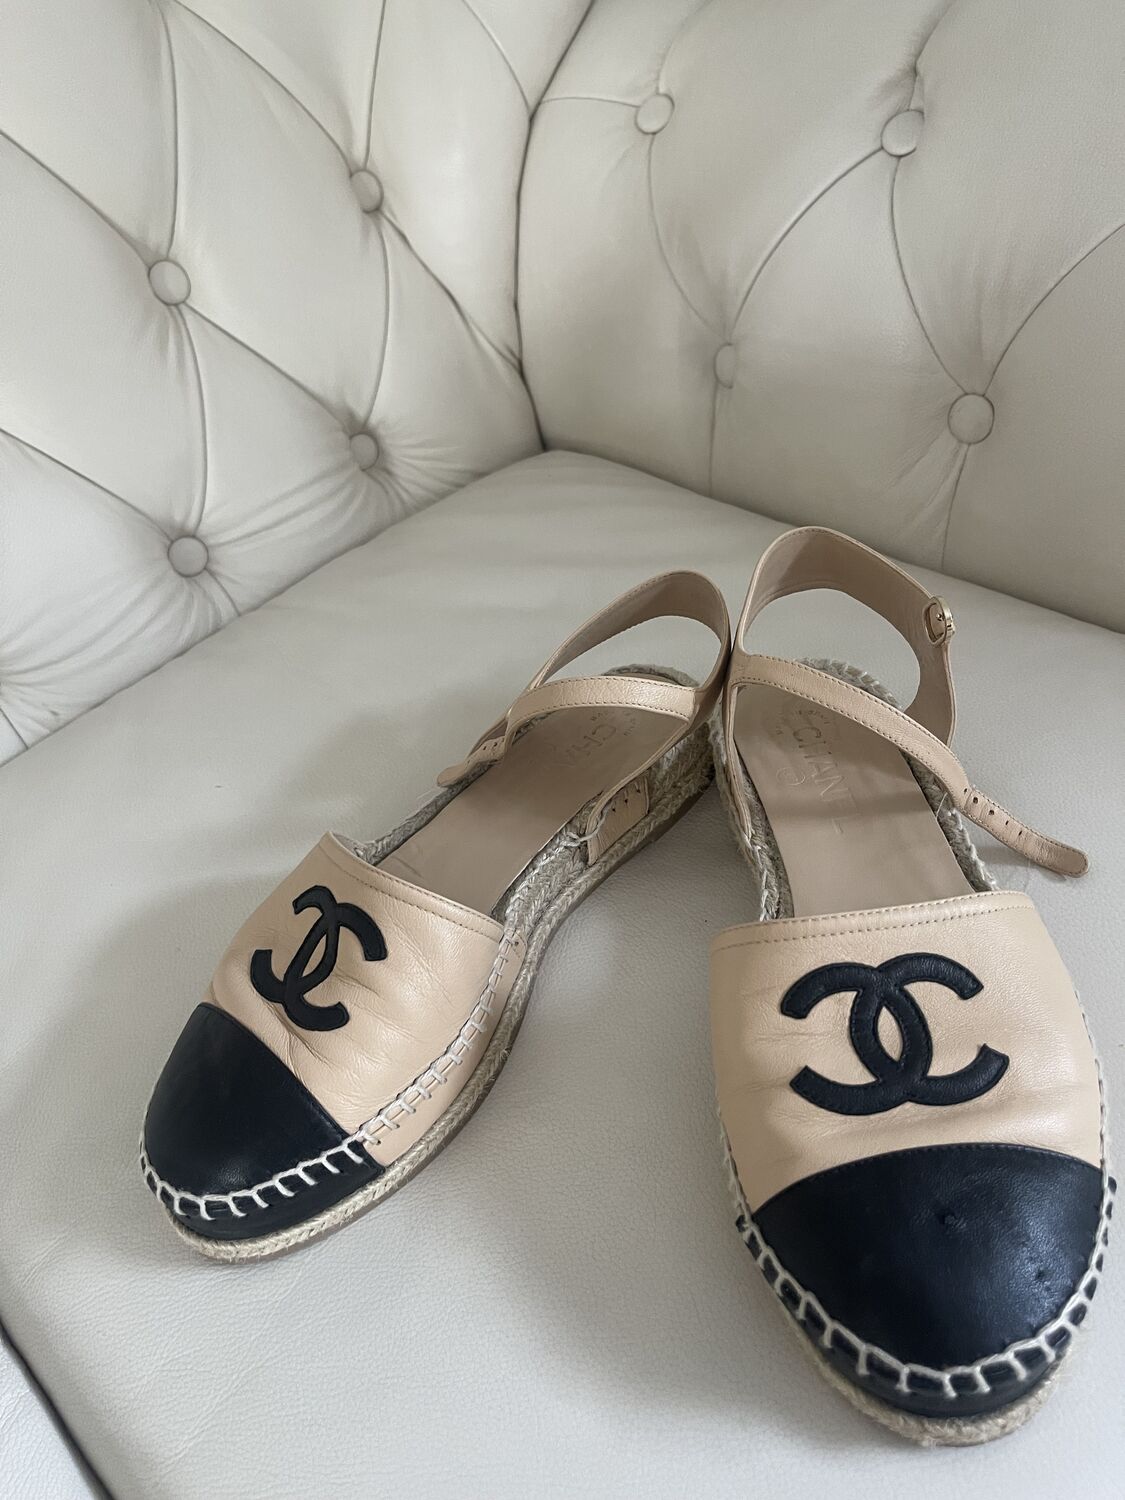 Leather Espadrilles Chanel - 38, buy pre-owned at 400 EUR